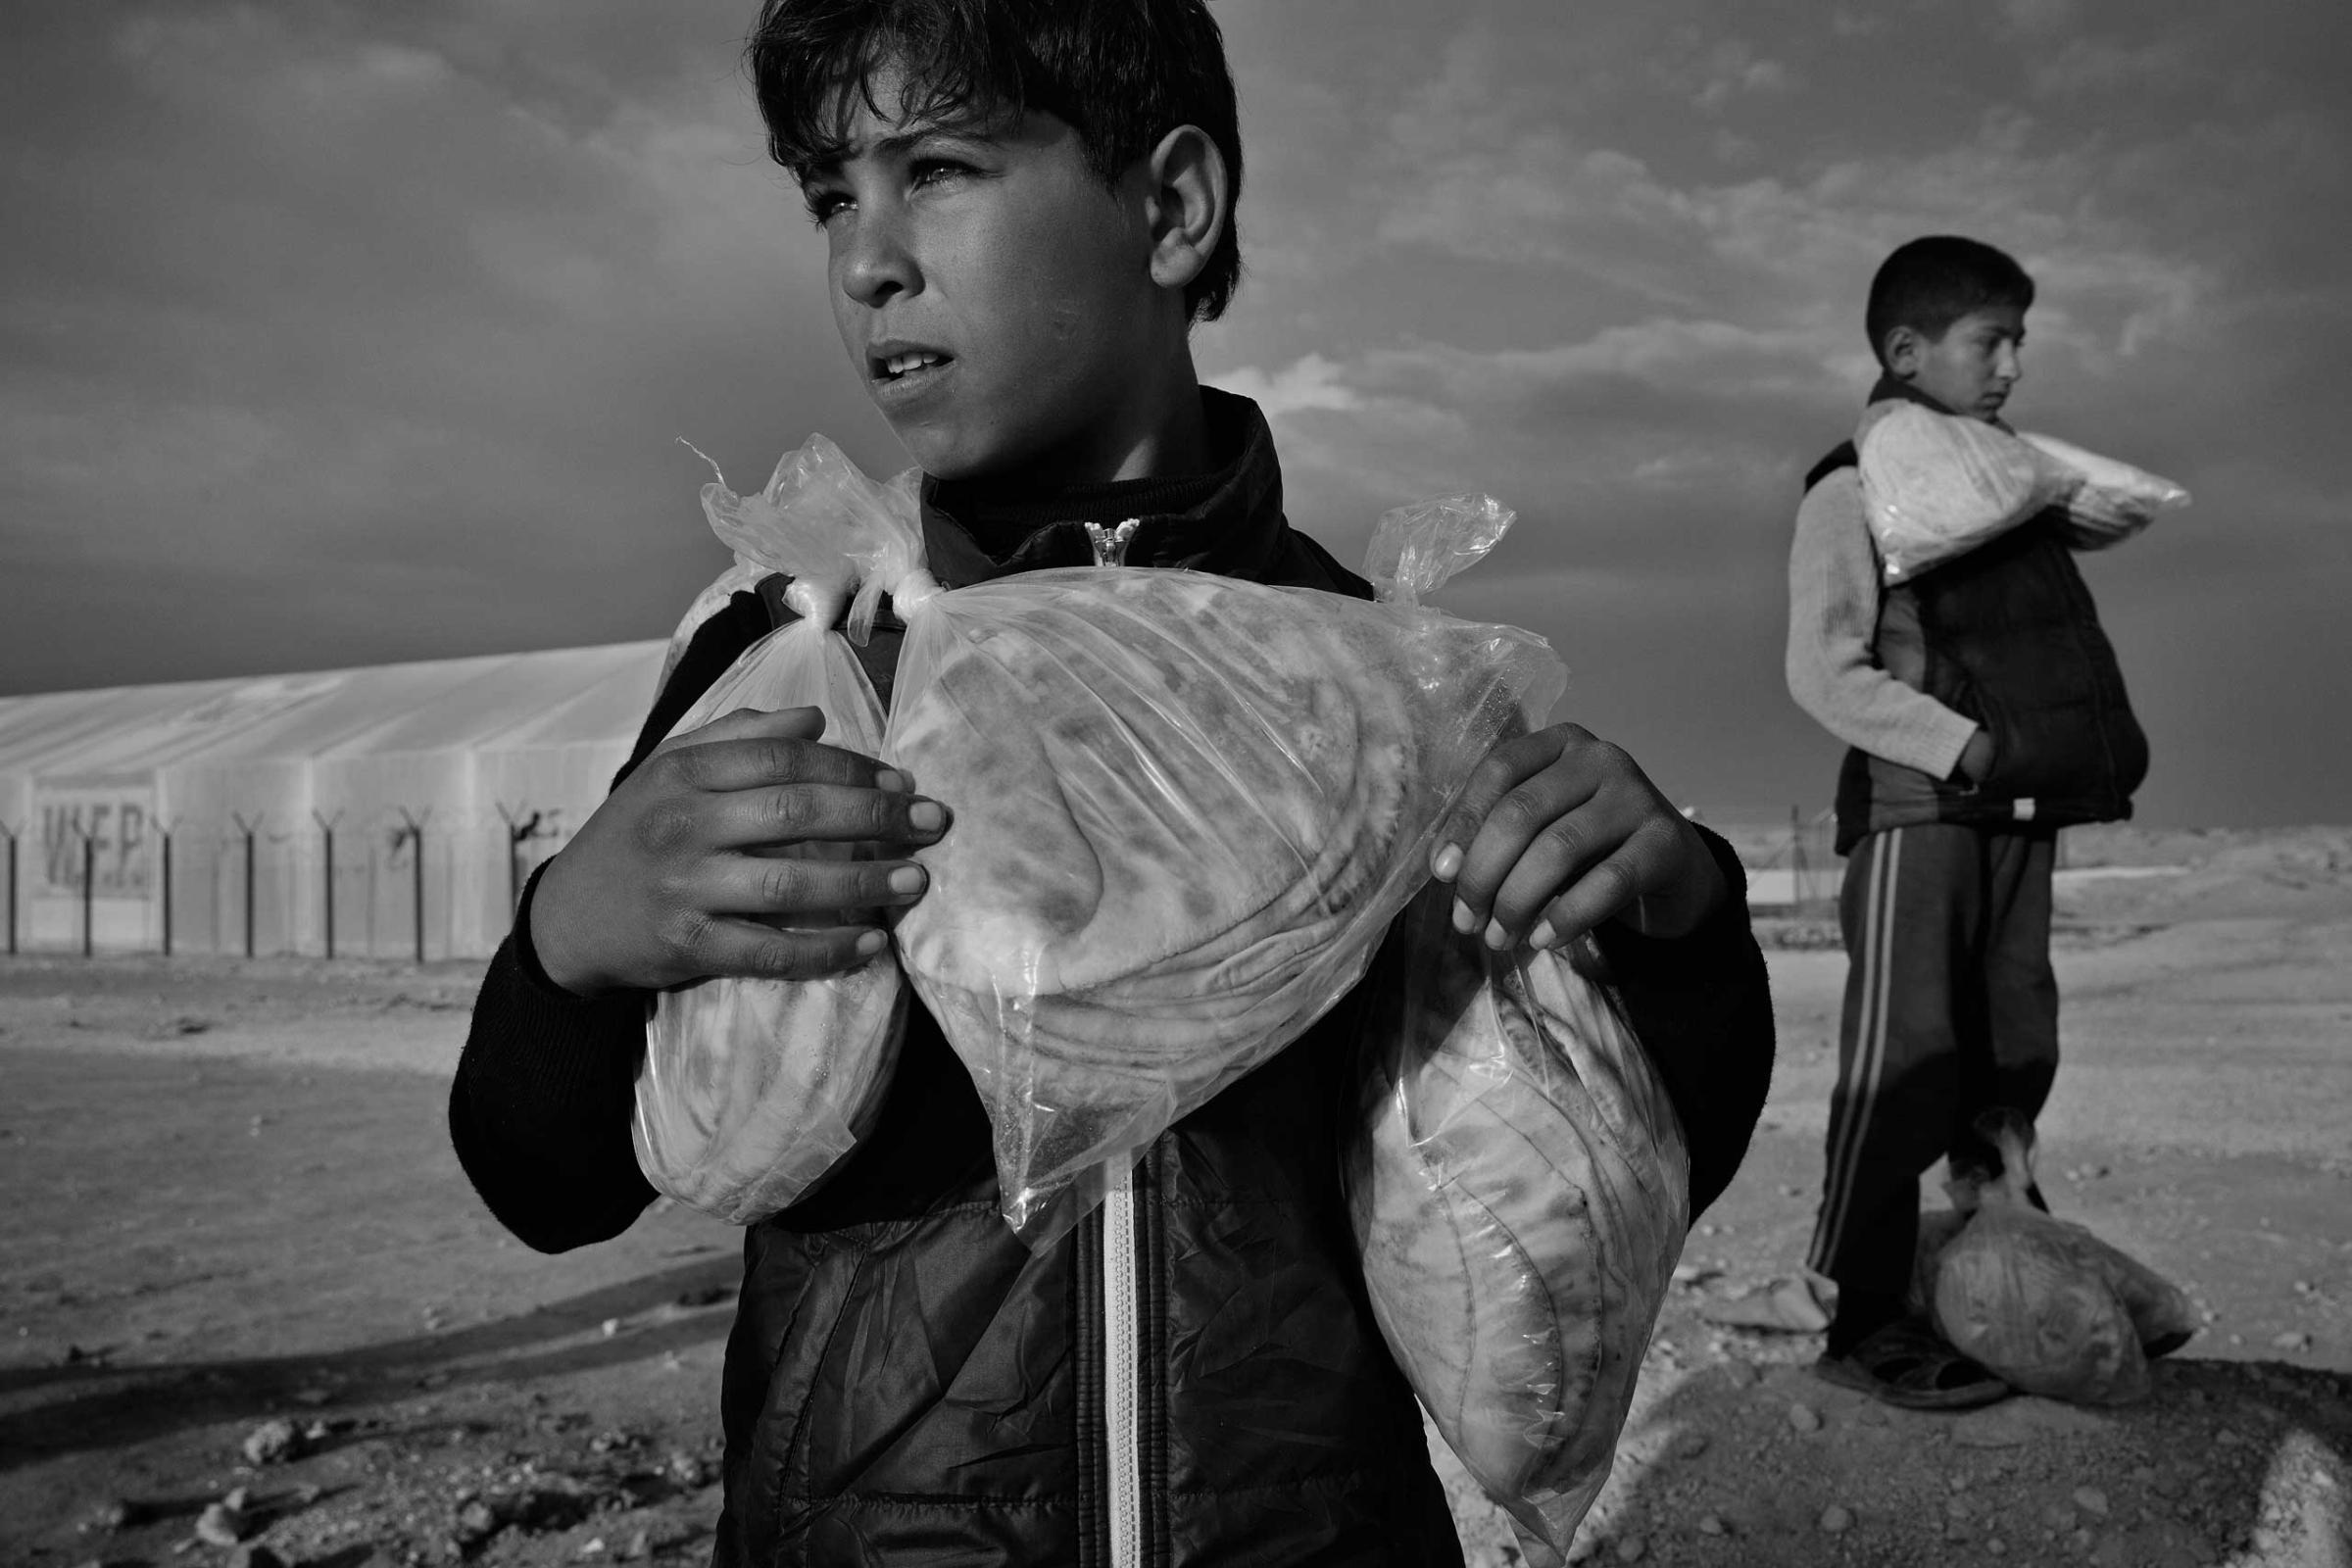 Zaatari Camp, in Jordan, run by UNHCR for refugees from war in Syria.Daily bread ration supplied by WFP. Photograph by James Nachtwey.